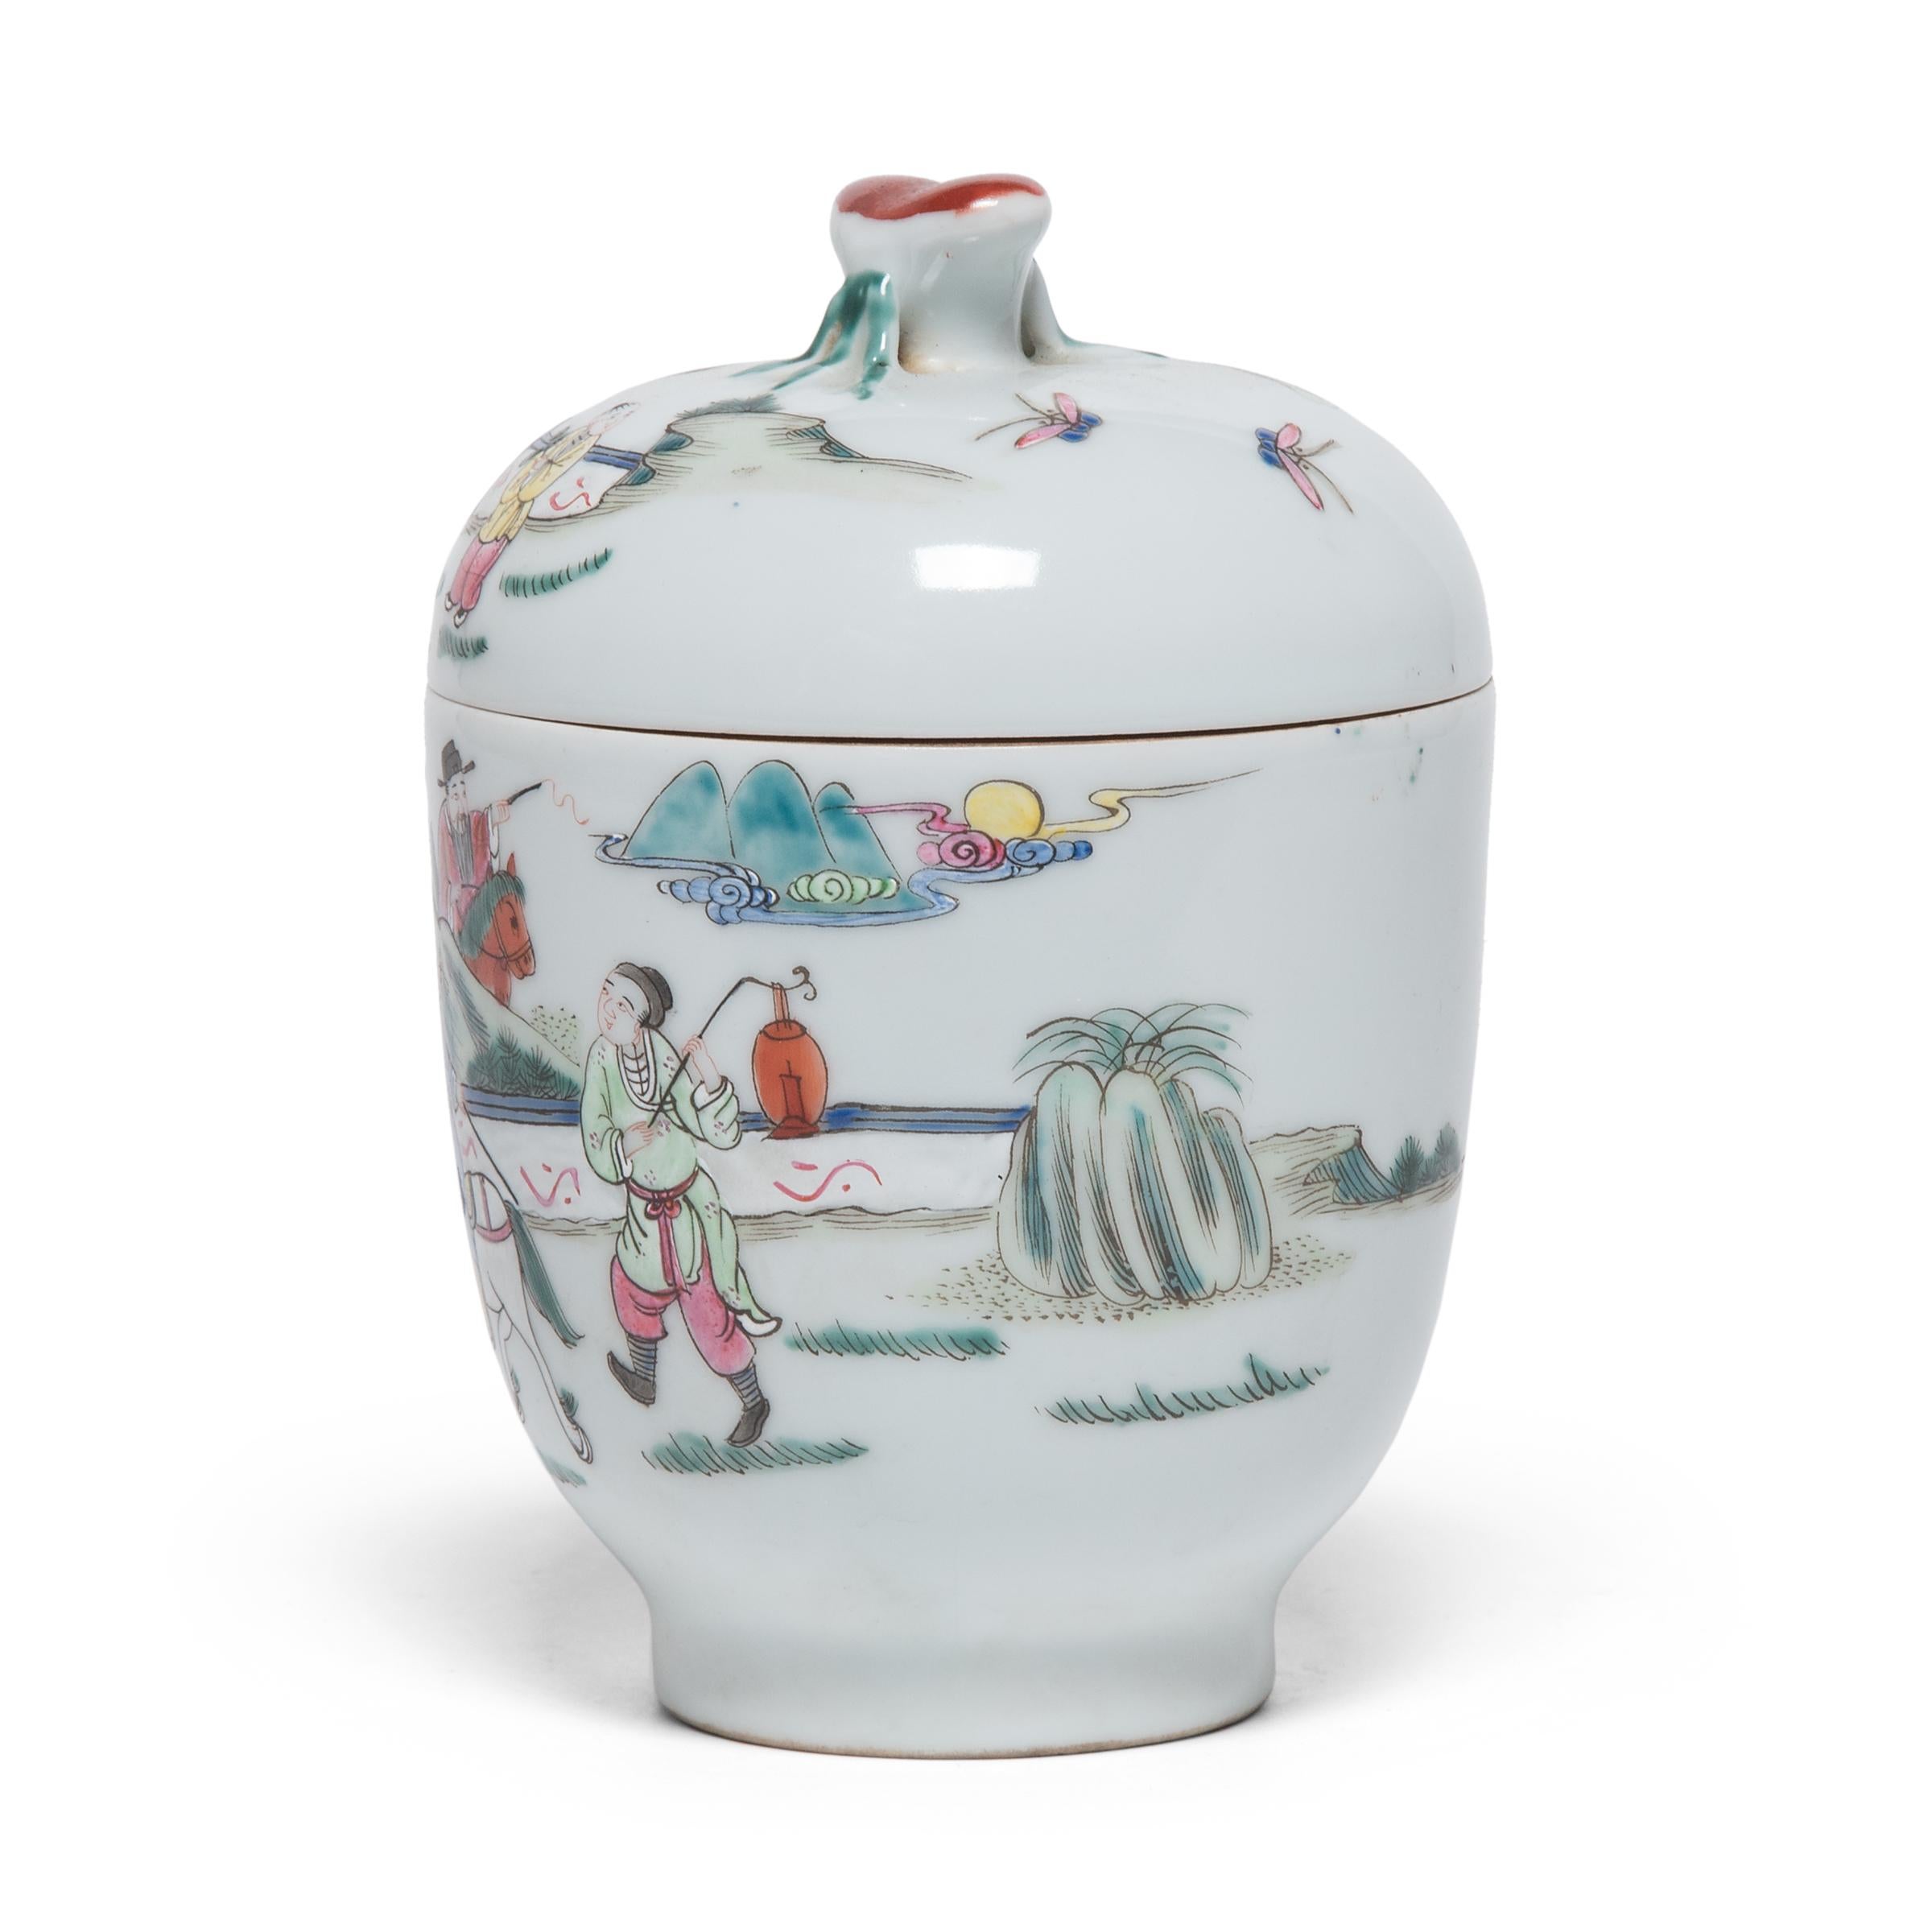 This petite oval jar is decorated with colorful and bold enamels in the style of famille verte porcelain ware. Made with a highly refined paste resulting in an exceptionally fine grade of ceramic ware, famille verte porcelain is identifiable by its